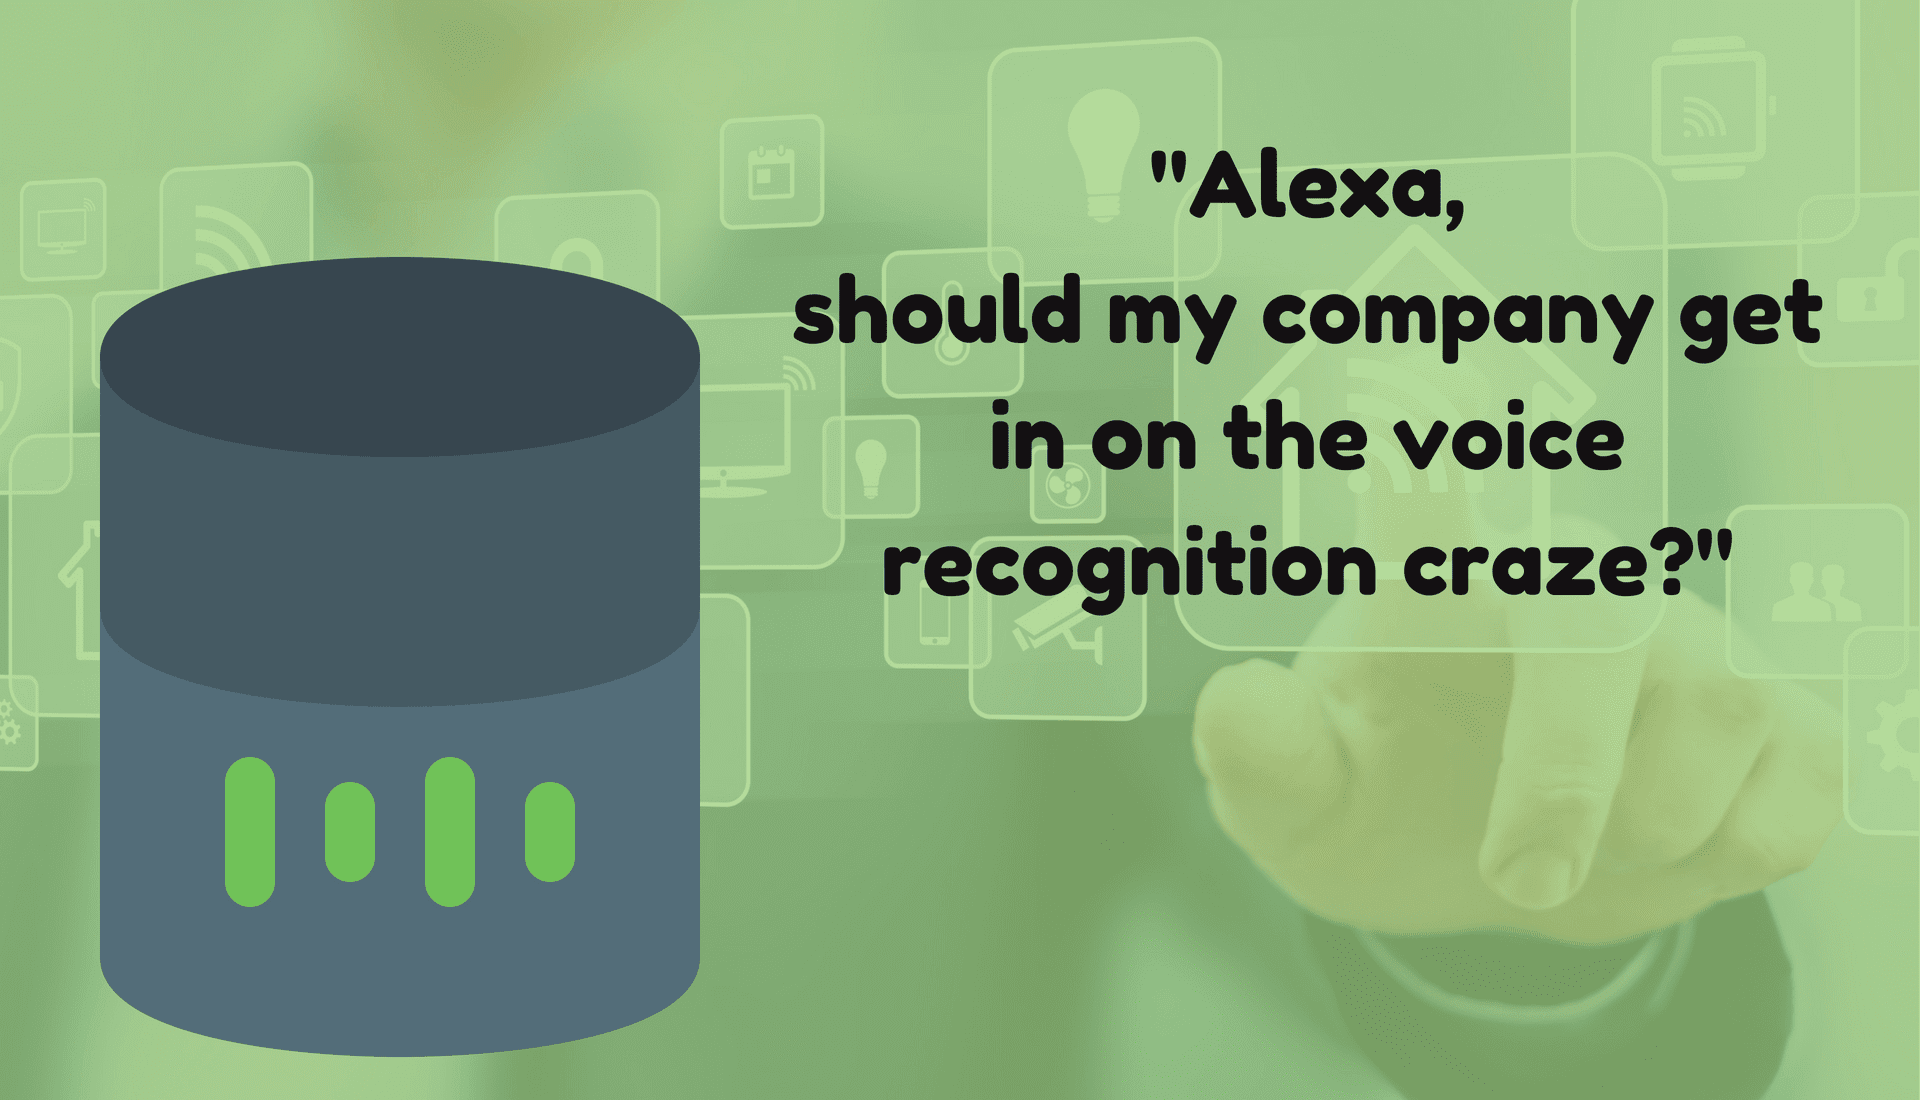 Alexa should my company get in on the voice recognition craze?